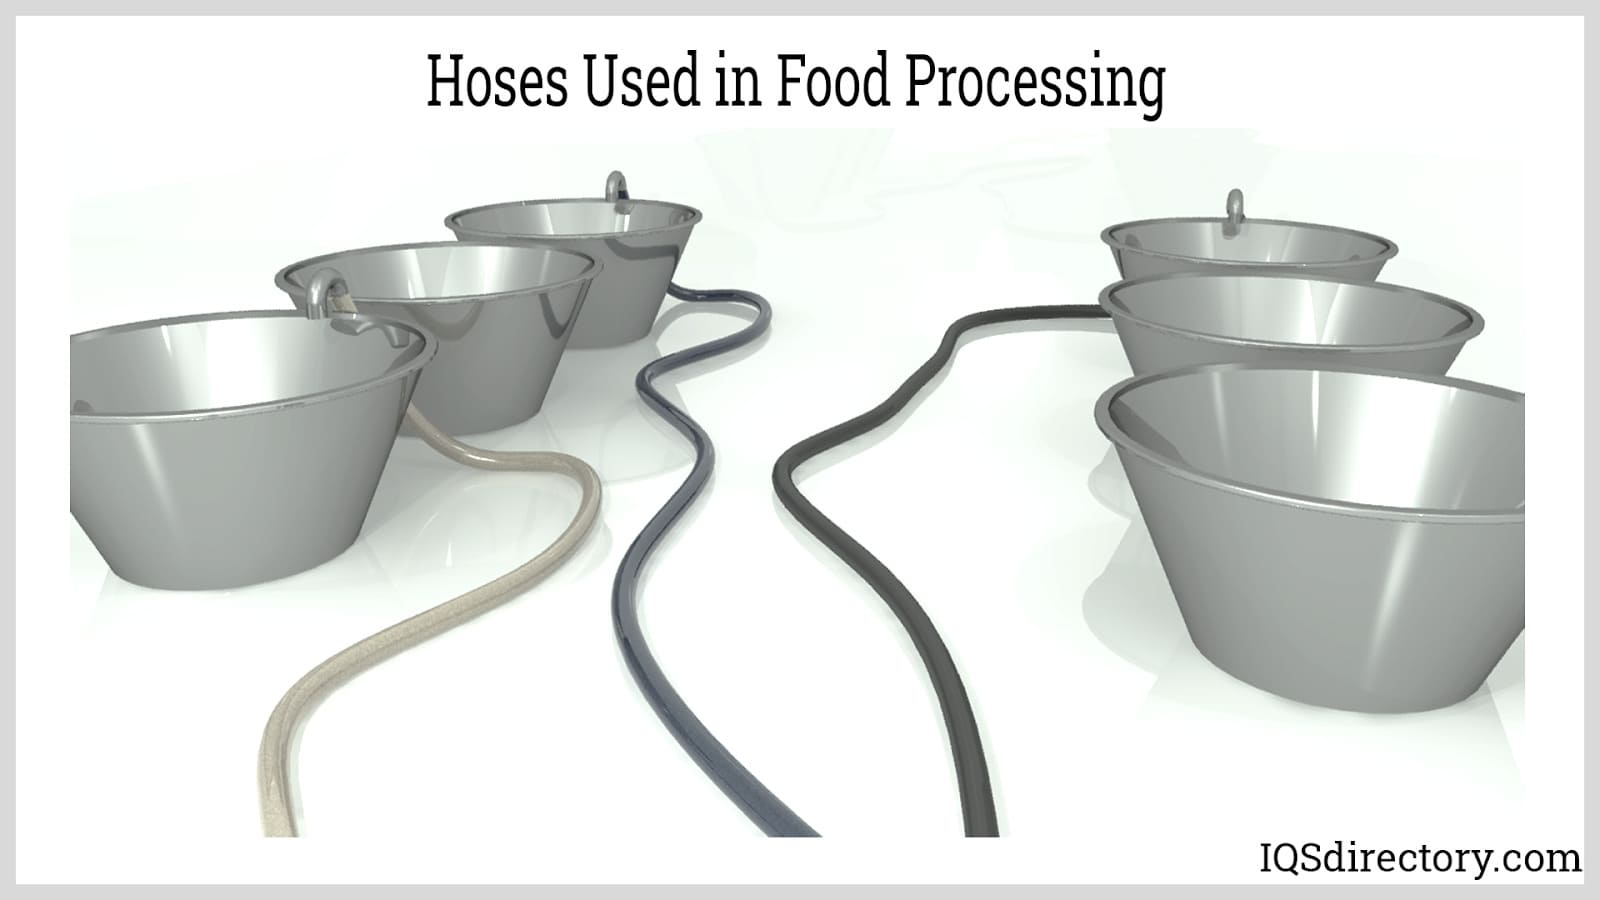 Hoses Used in Food Processing